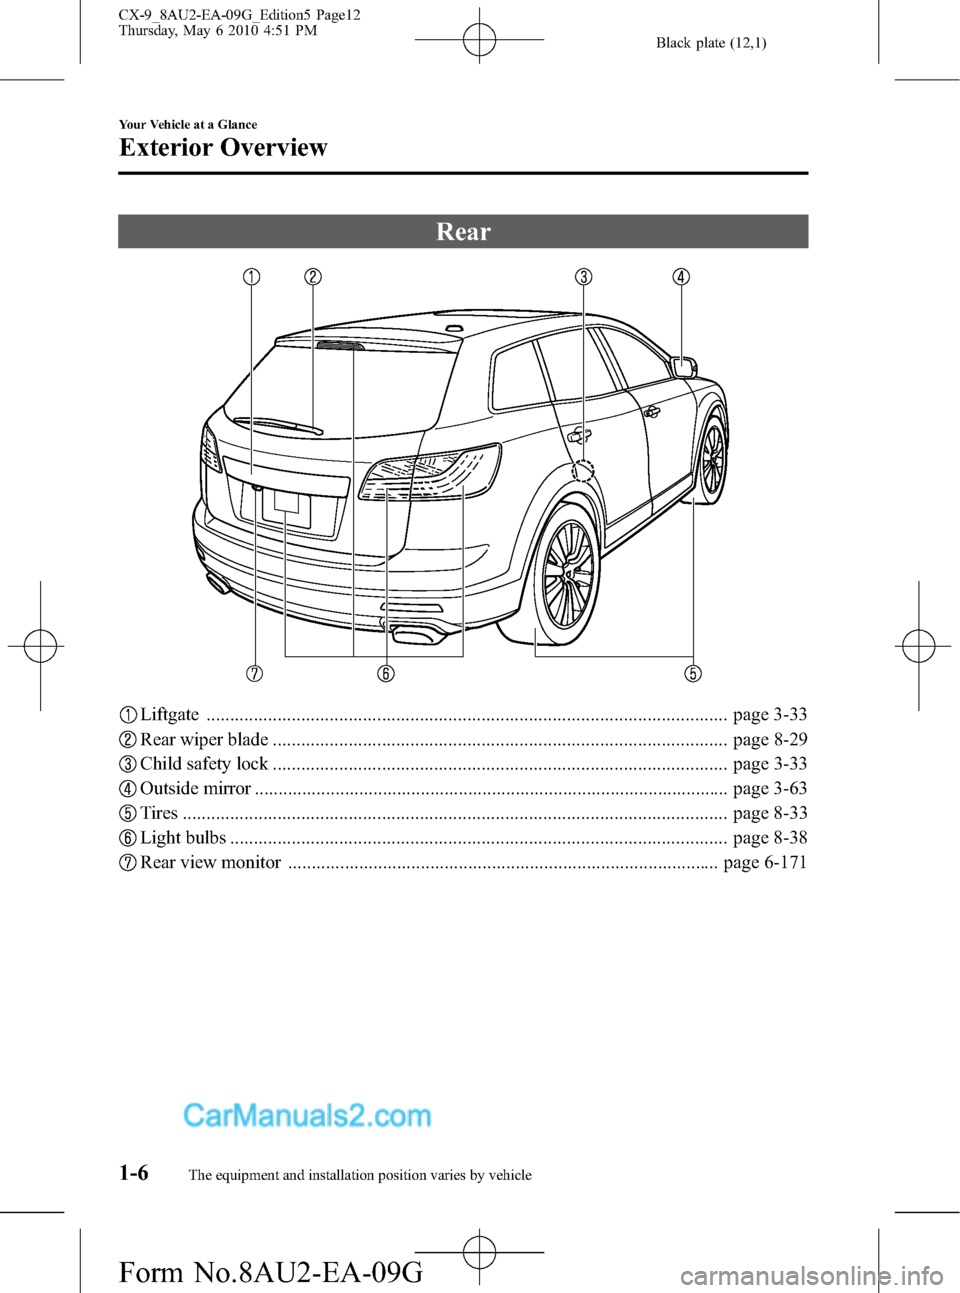 MAZDA MODEL CX-9 2010  Owners Manual (in English) Black plate (12,1)
Rear
Liftgate .............................................................................................................. page 3-33
Rear wiper blade .............................